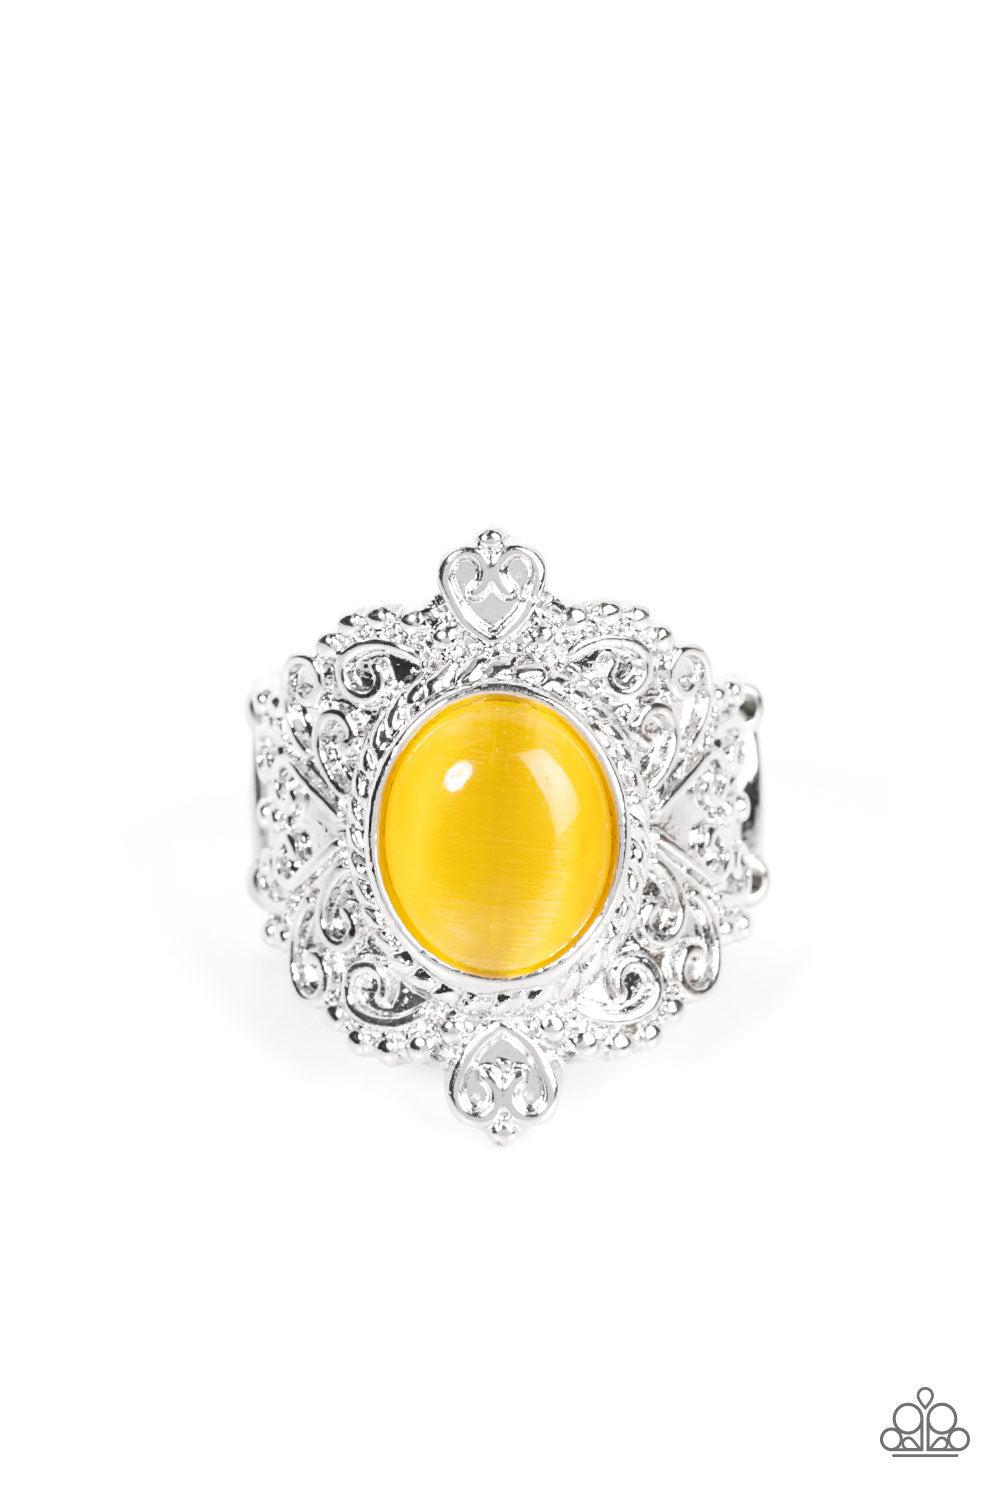 Delightfully Dreamy Yellow Cat's Eye Stone Ring - Paparazzi Accessories- lightbox - CarasShop.com - $5 Jewelry by Cara Jewels